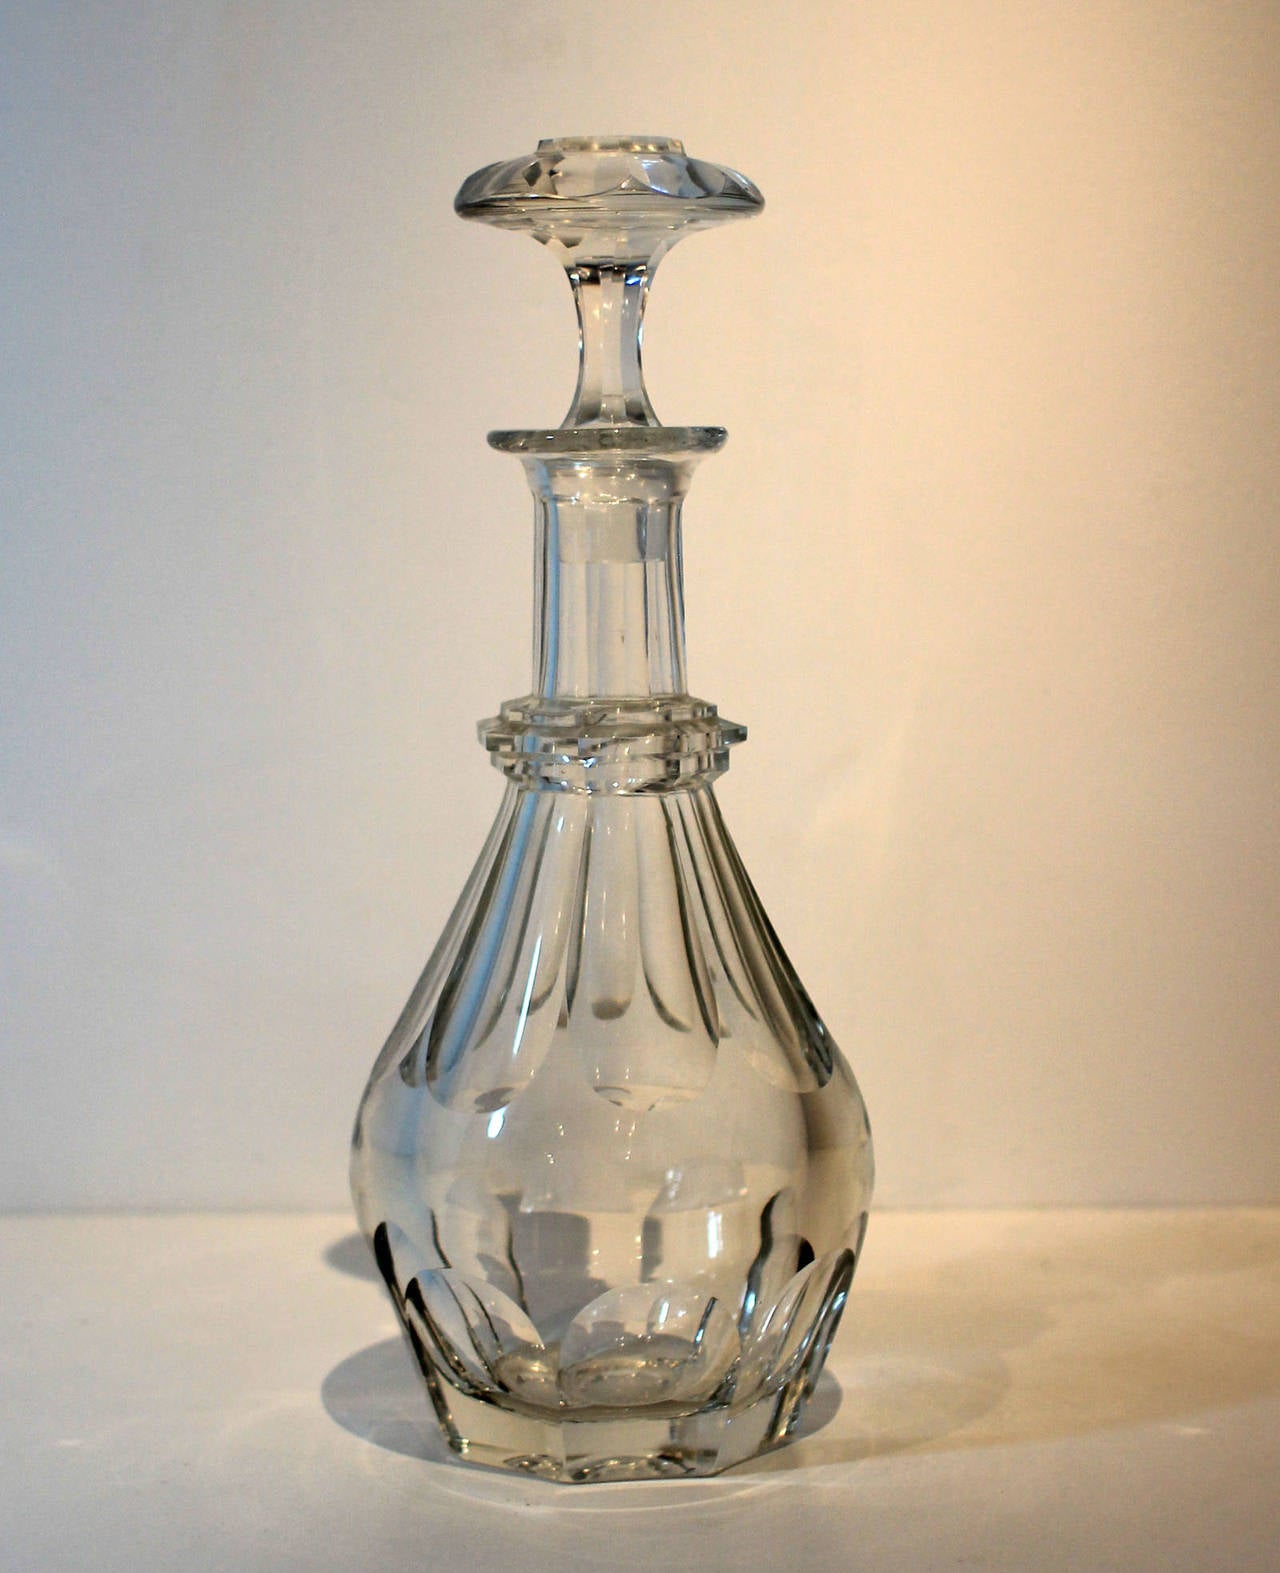 Tall, statuesque decanter with unusually tall stopper and fine cut decoration. Probably American, 19th century.